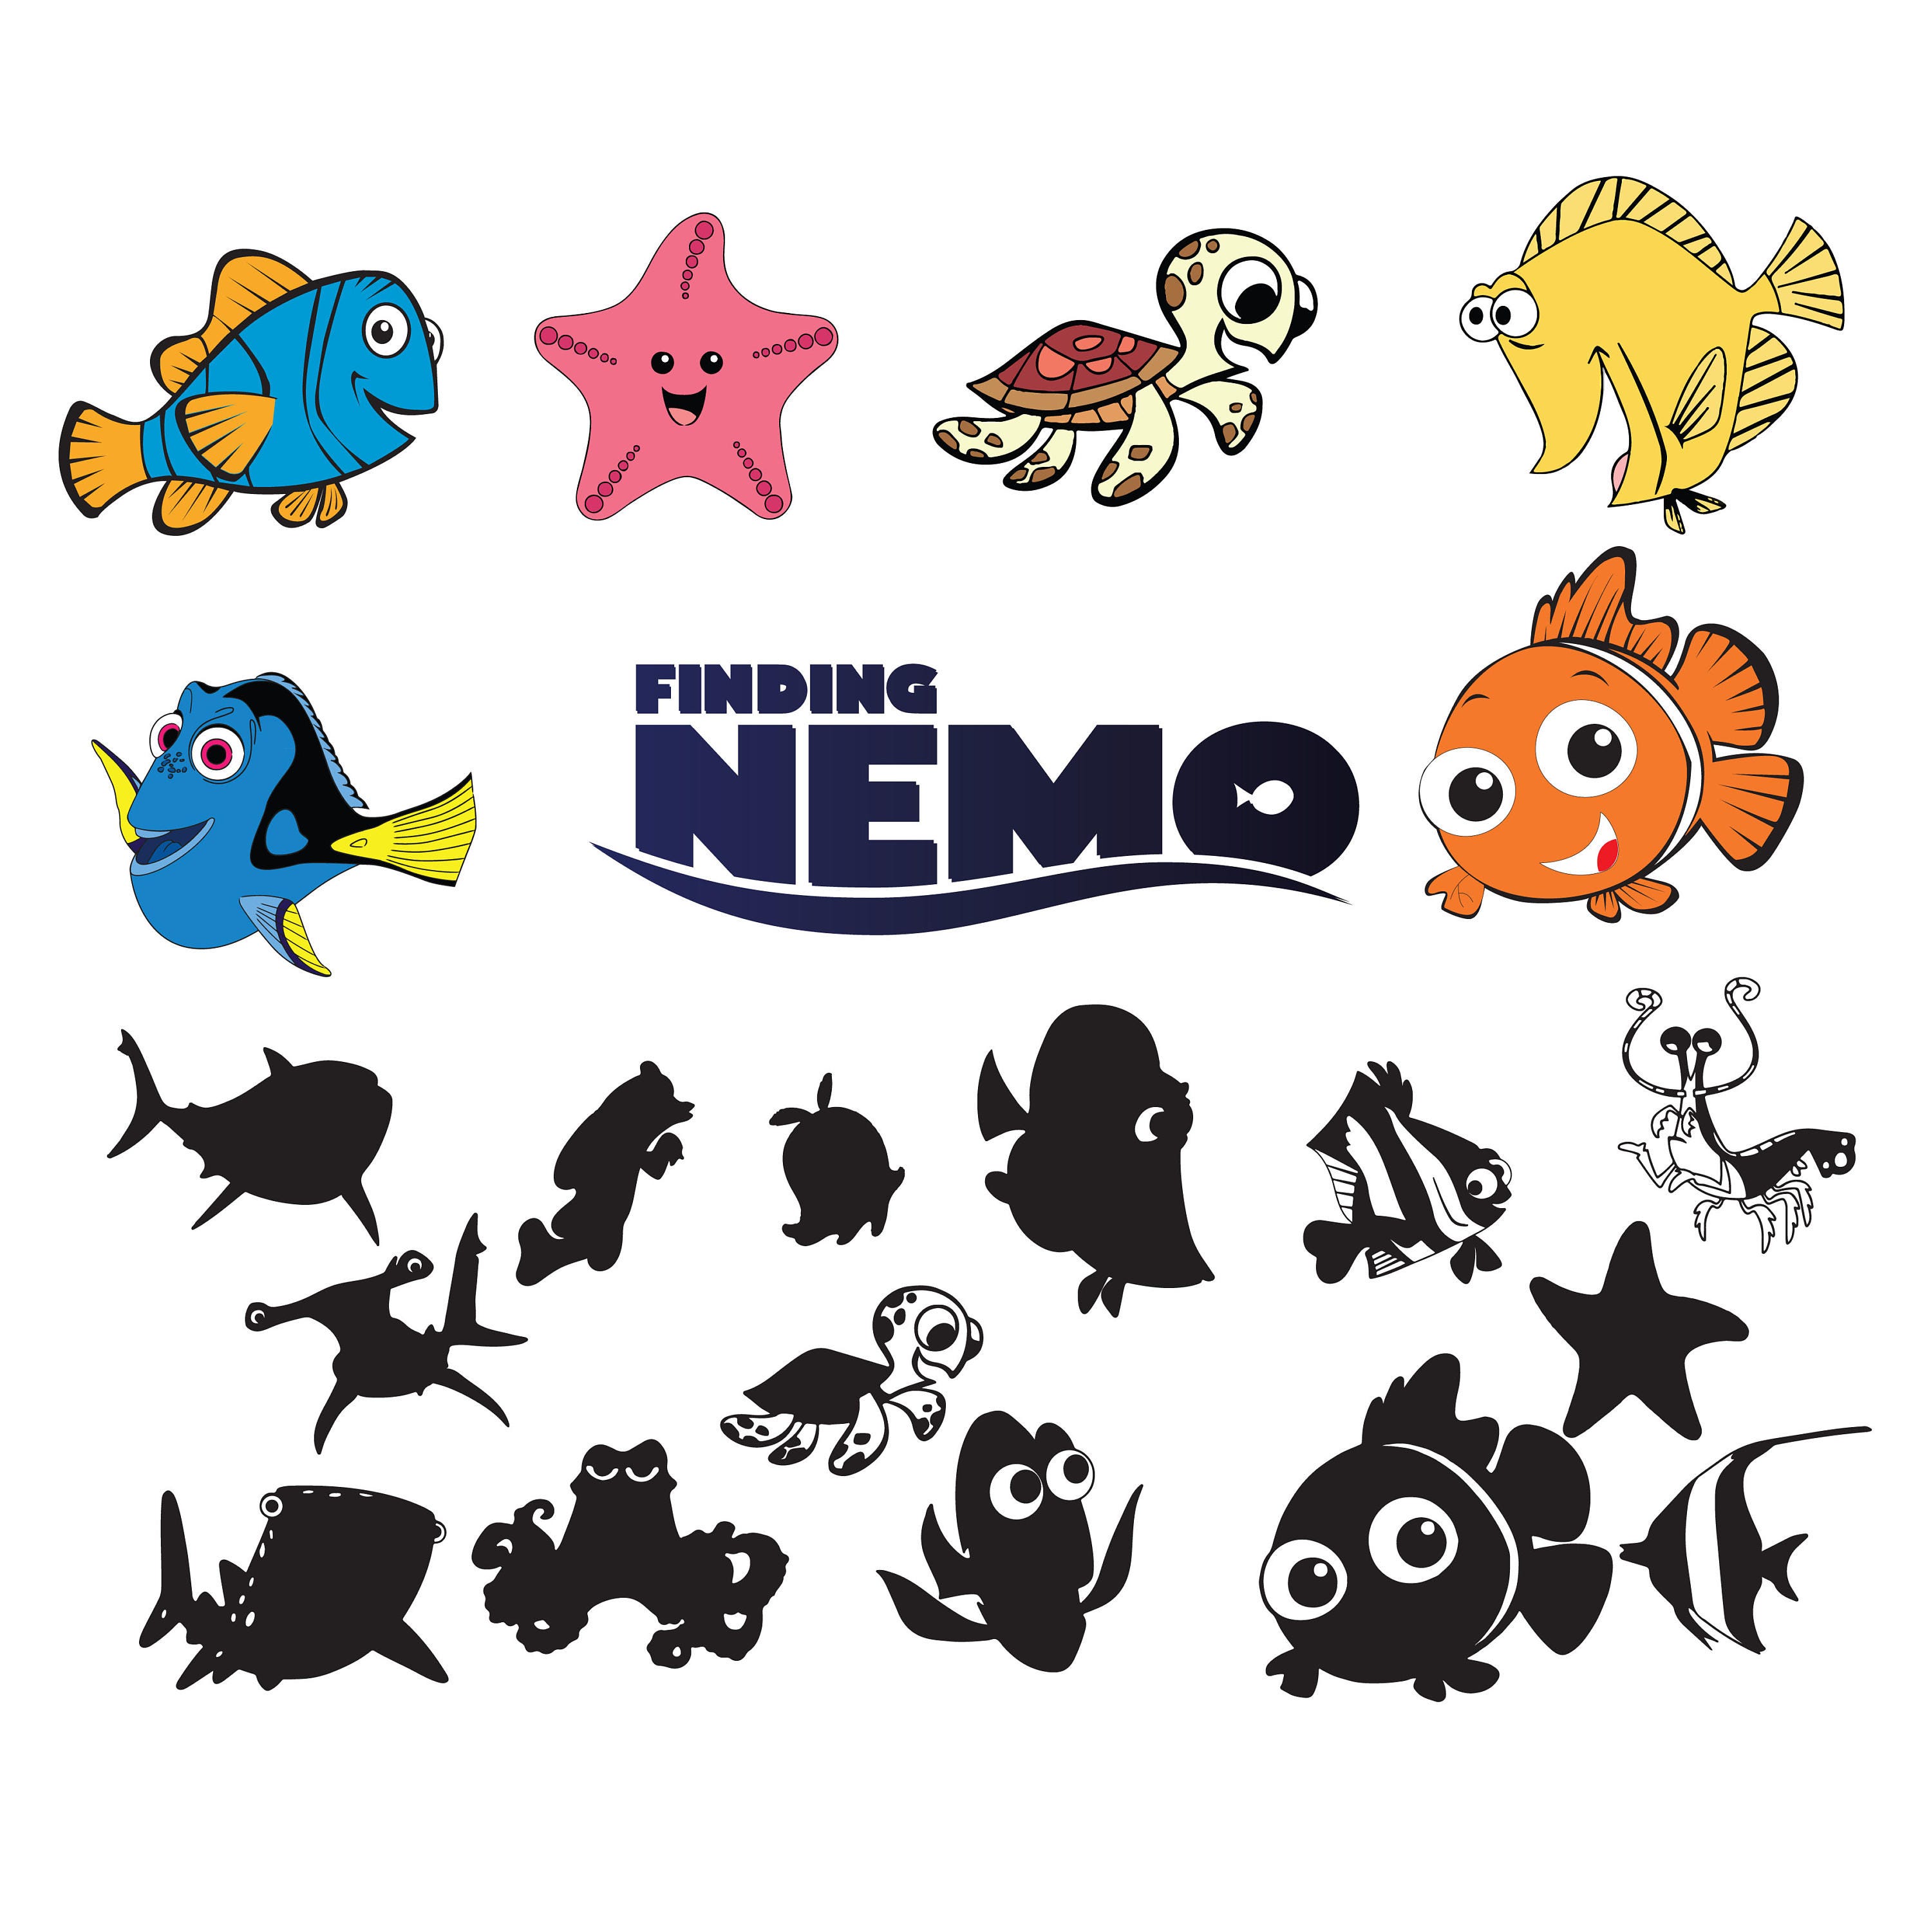 Download Finding nemo svgNemo pngjpgeps for Print/ Silhouette